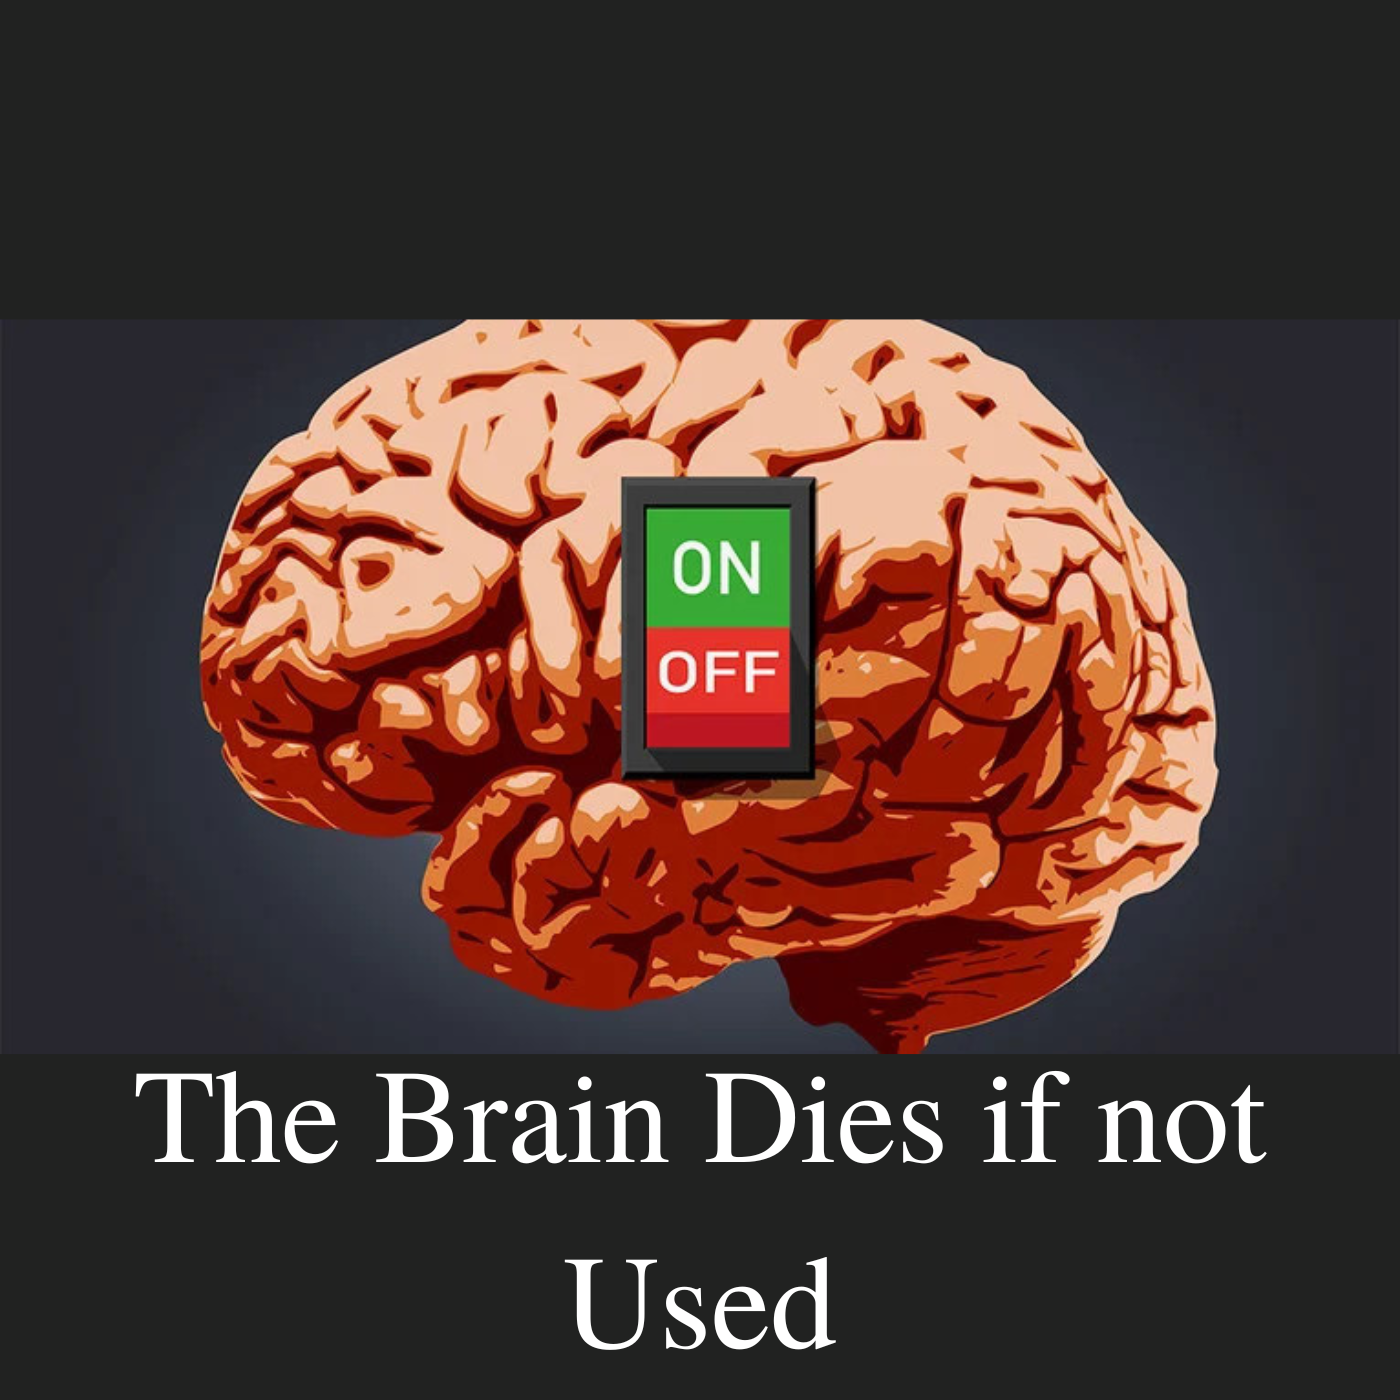 The Brain Dies if not Used